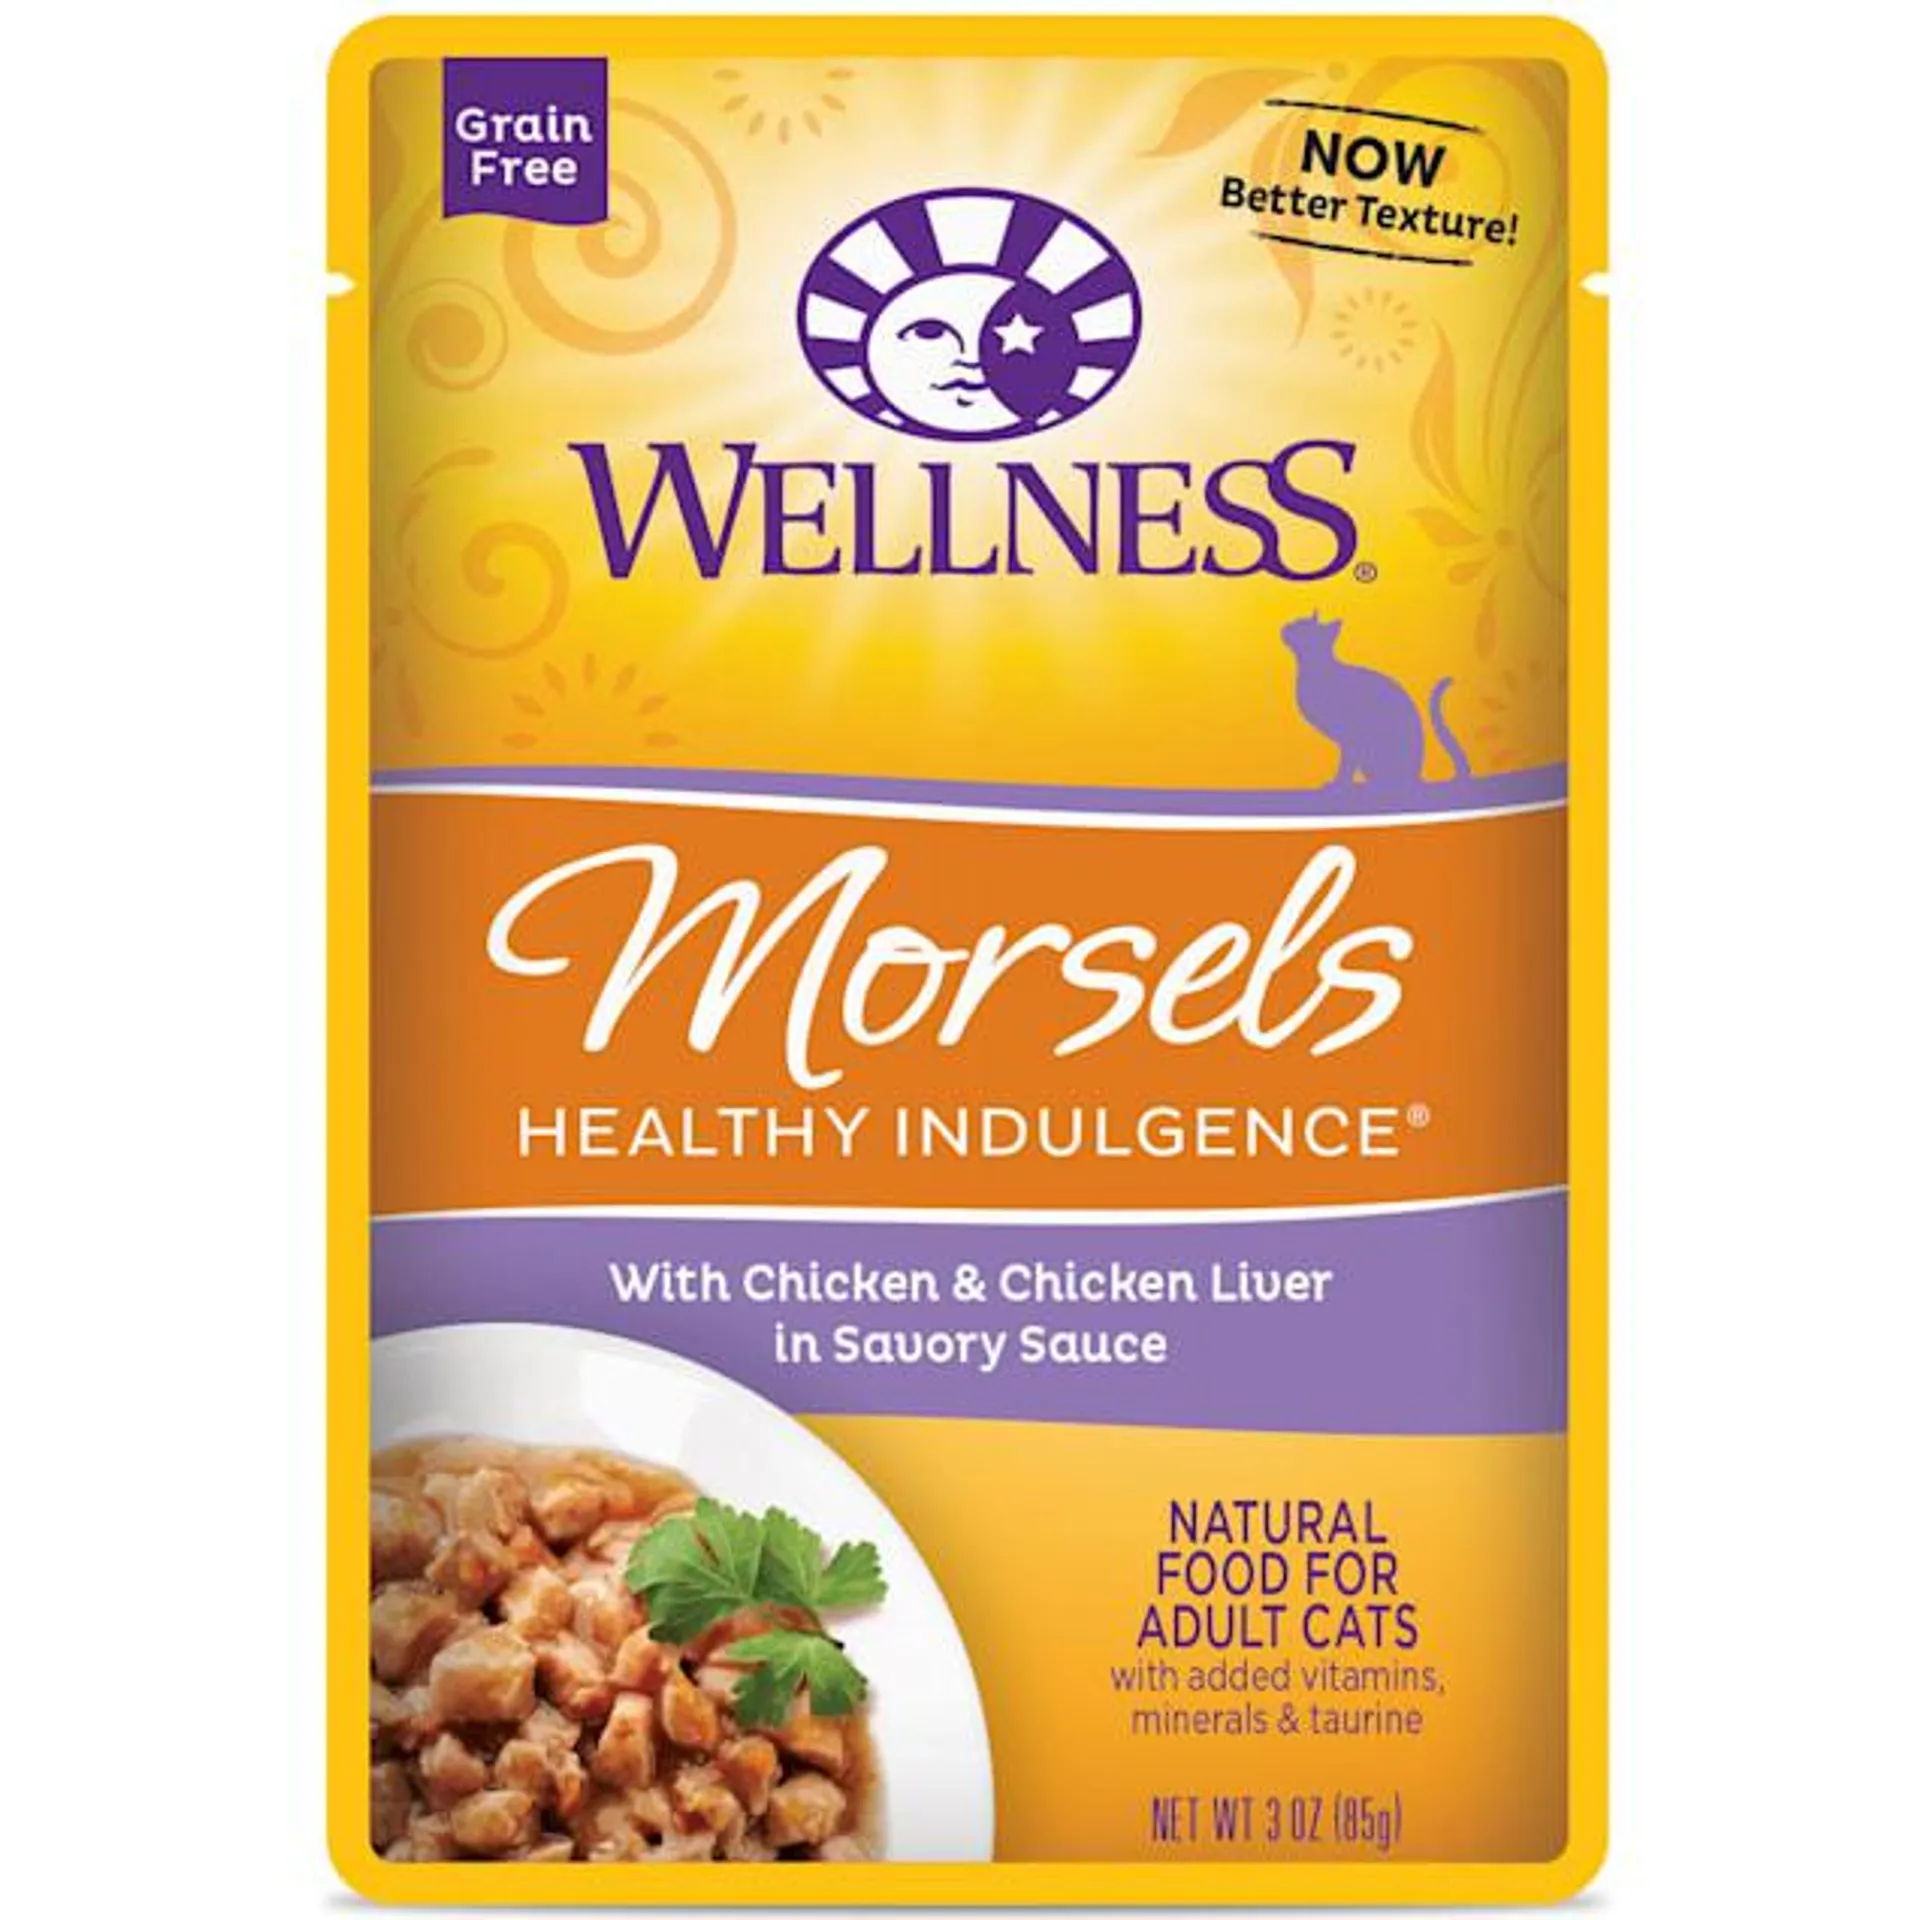 Wellness Healthy Indulgence Natural Grain Free Morsels w/Chicken & Chicken Liver in Sauce Wet Cat Food, 3 oz., Case of 12